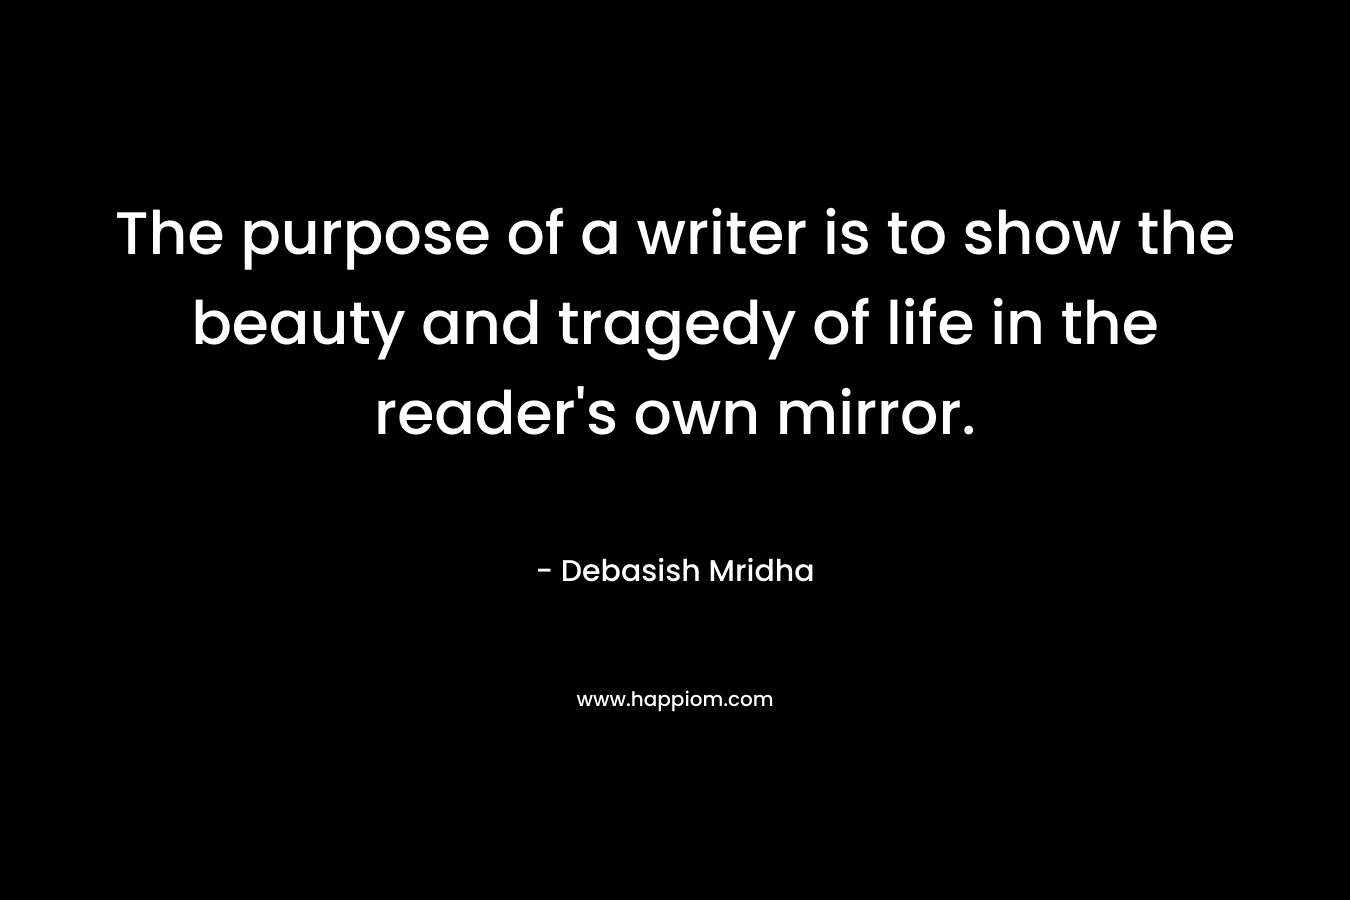 The purpose of a writer is to show the beauty and tragedy of life in the reader's own mirror.